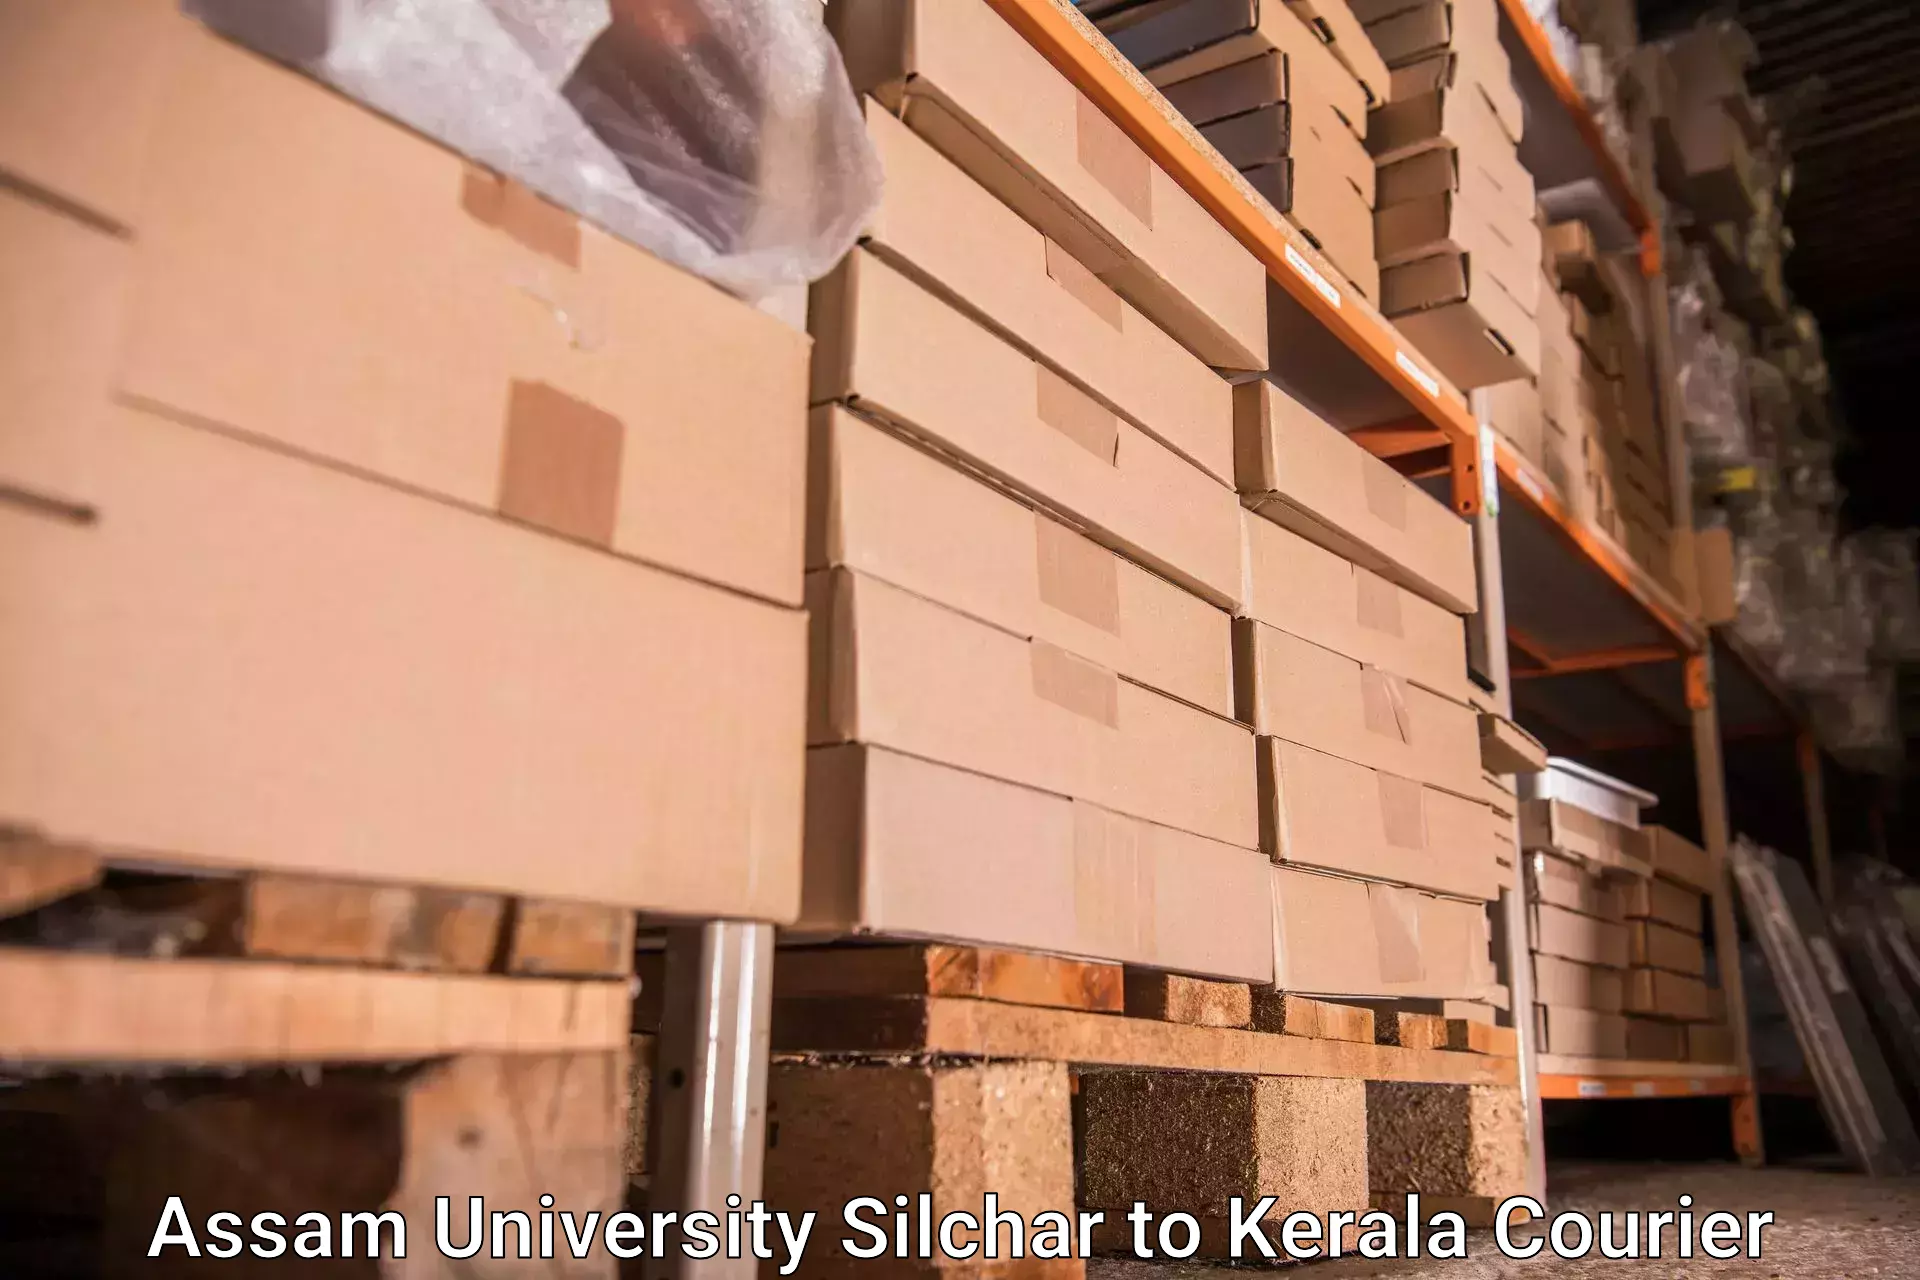 Instant baggage transport quote in Assam University Silchar to IIT Palakkad